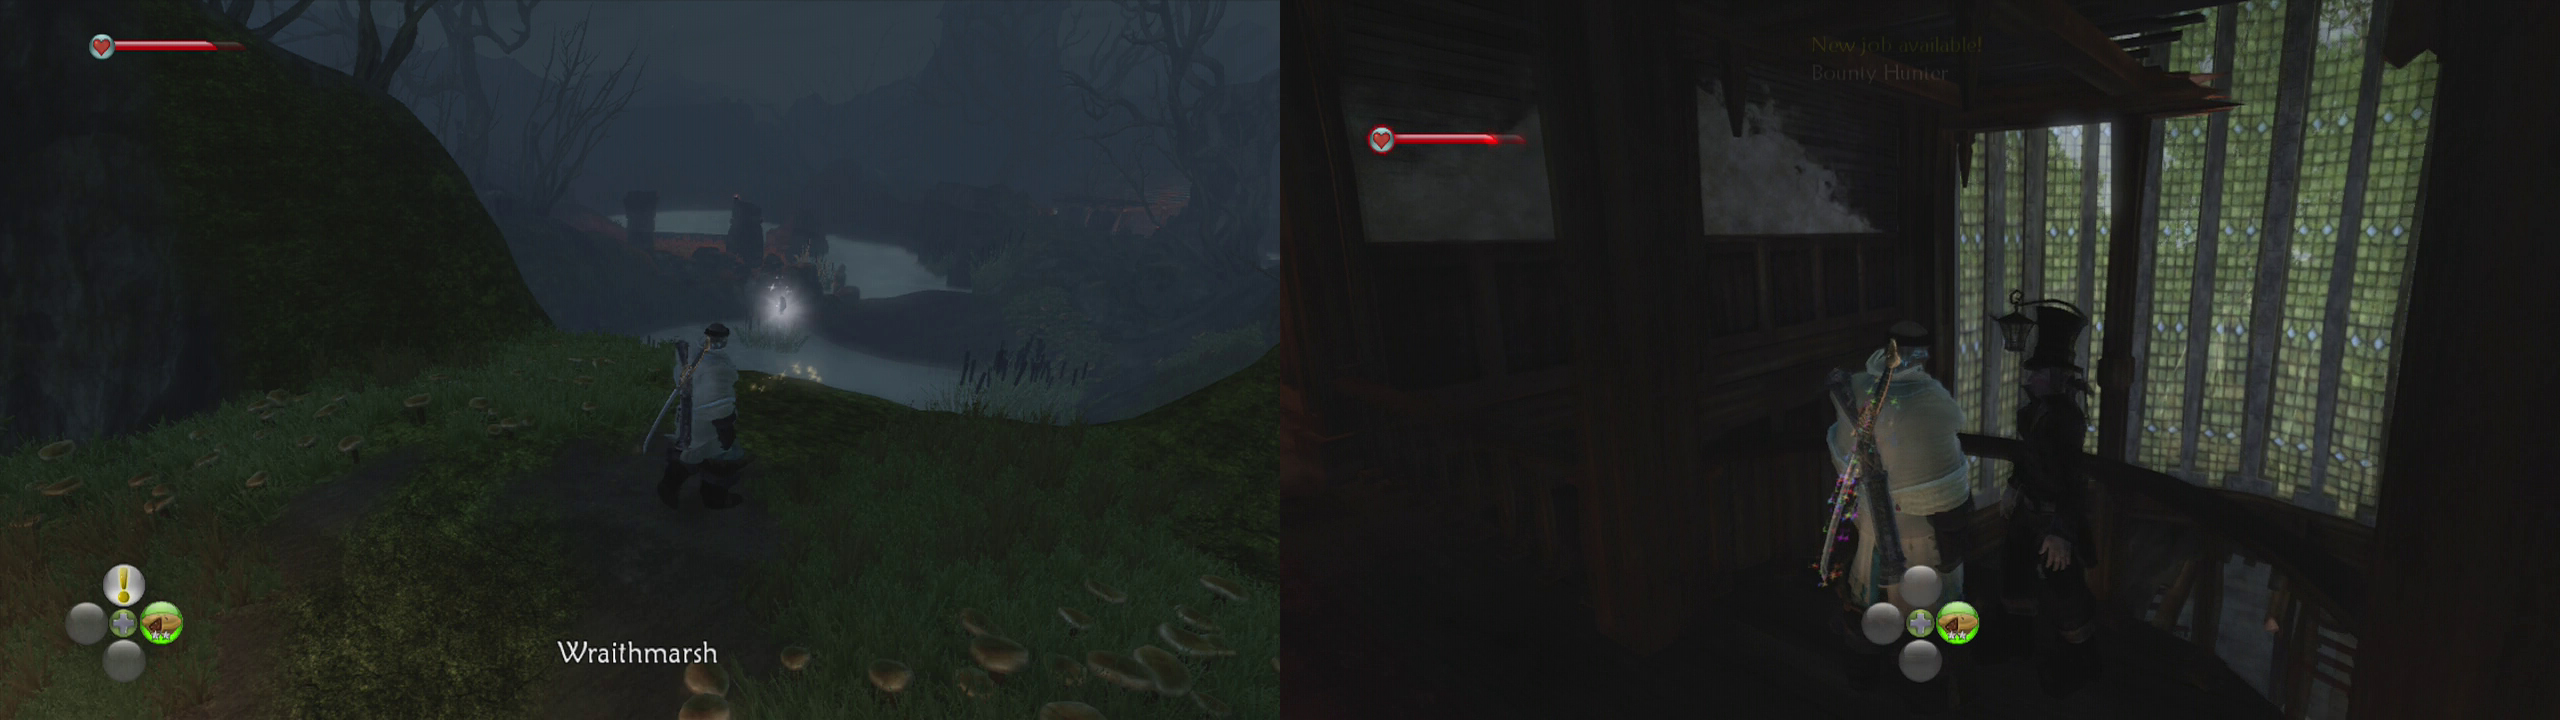 Exit to Wraithmarsh to find a key (left). Return to the gravekeeper to hand in the body part (right).